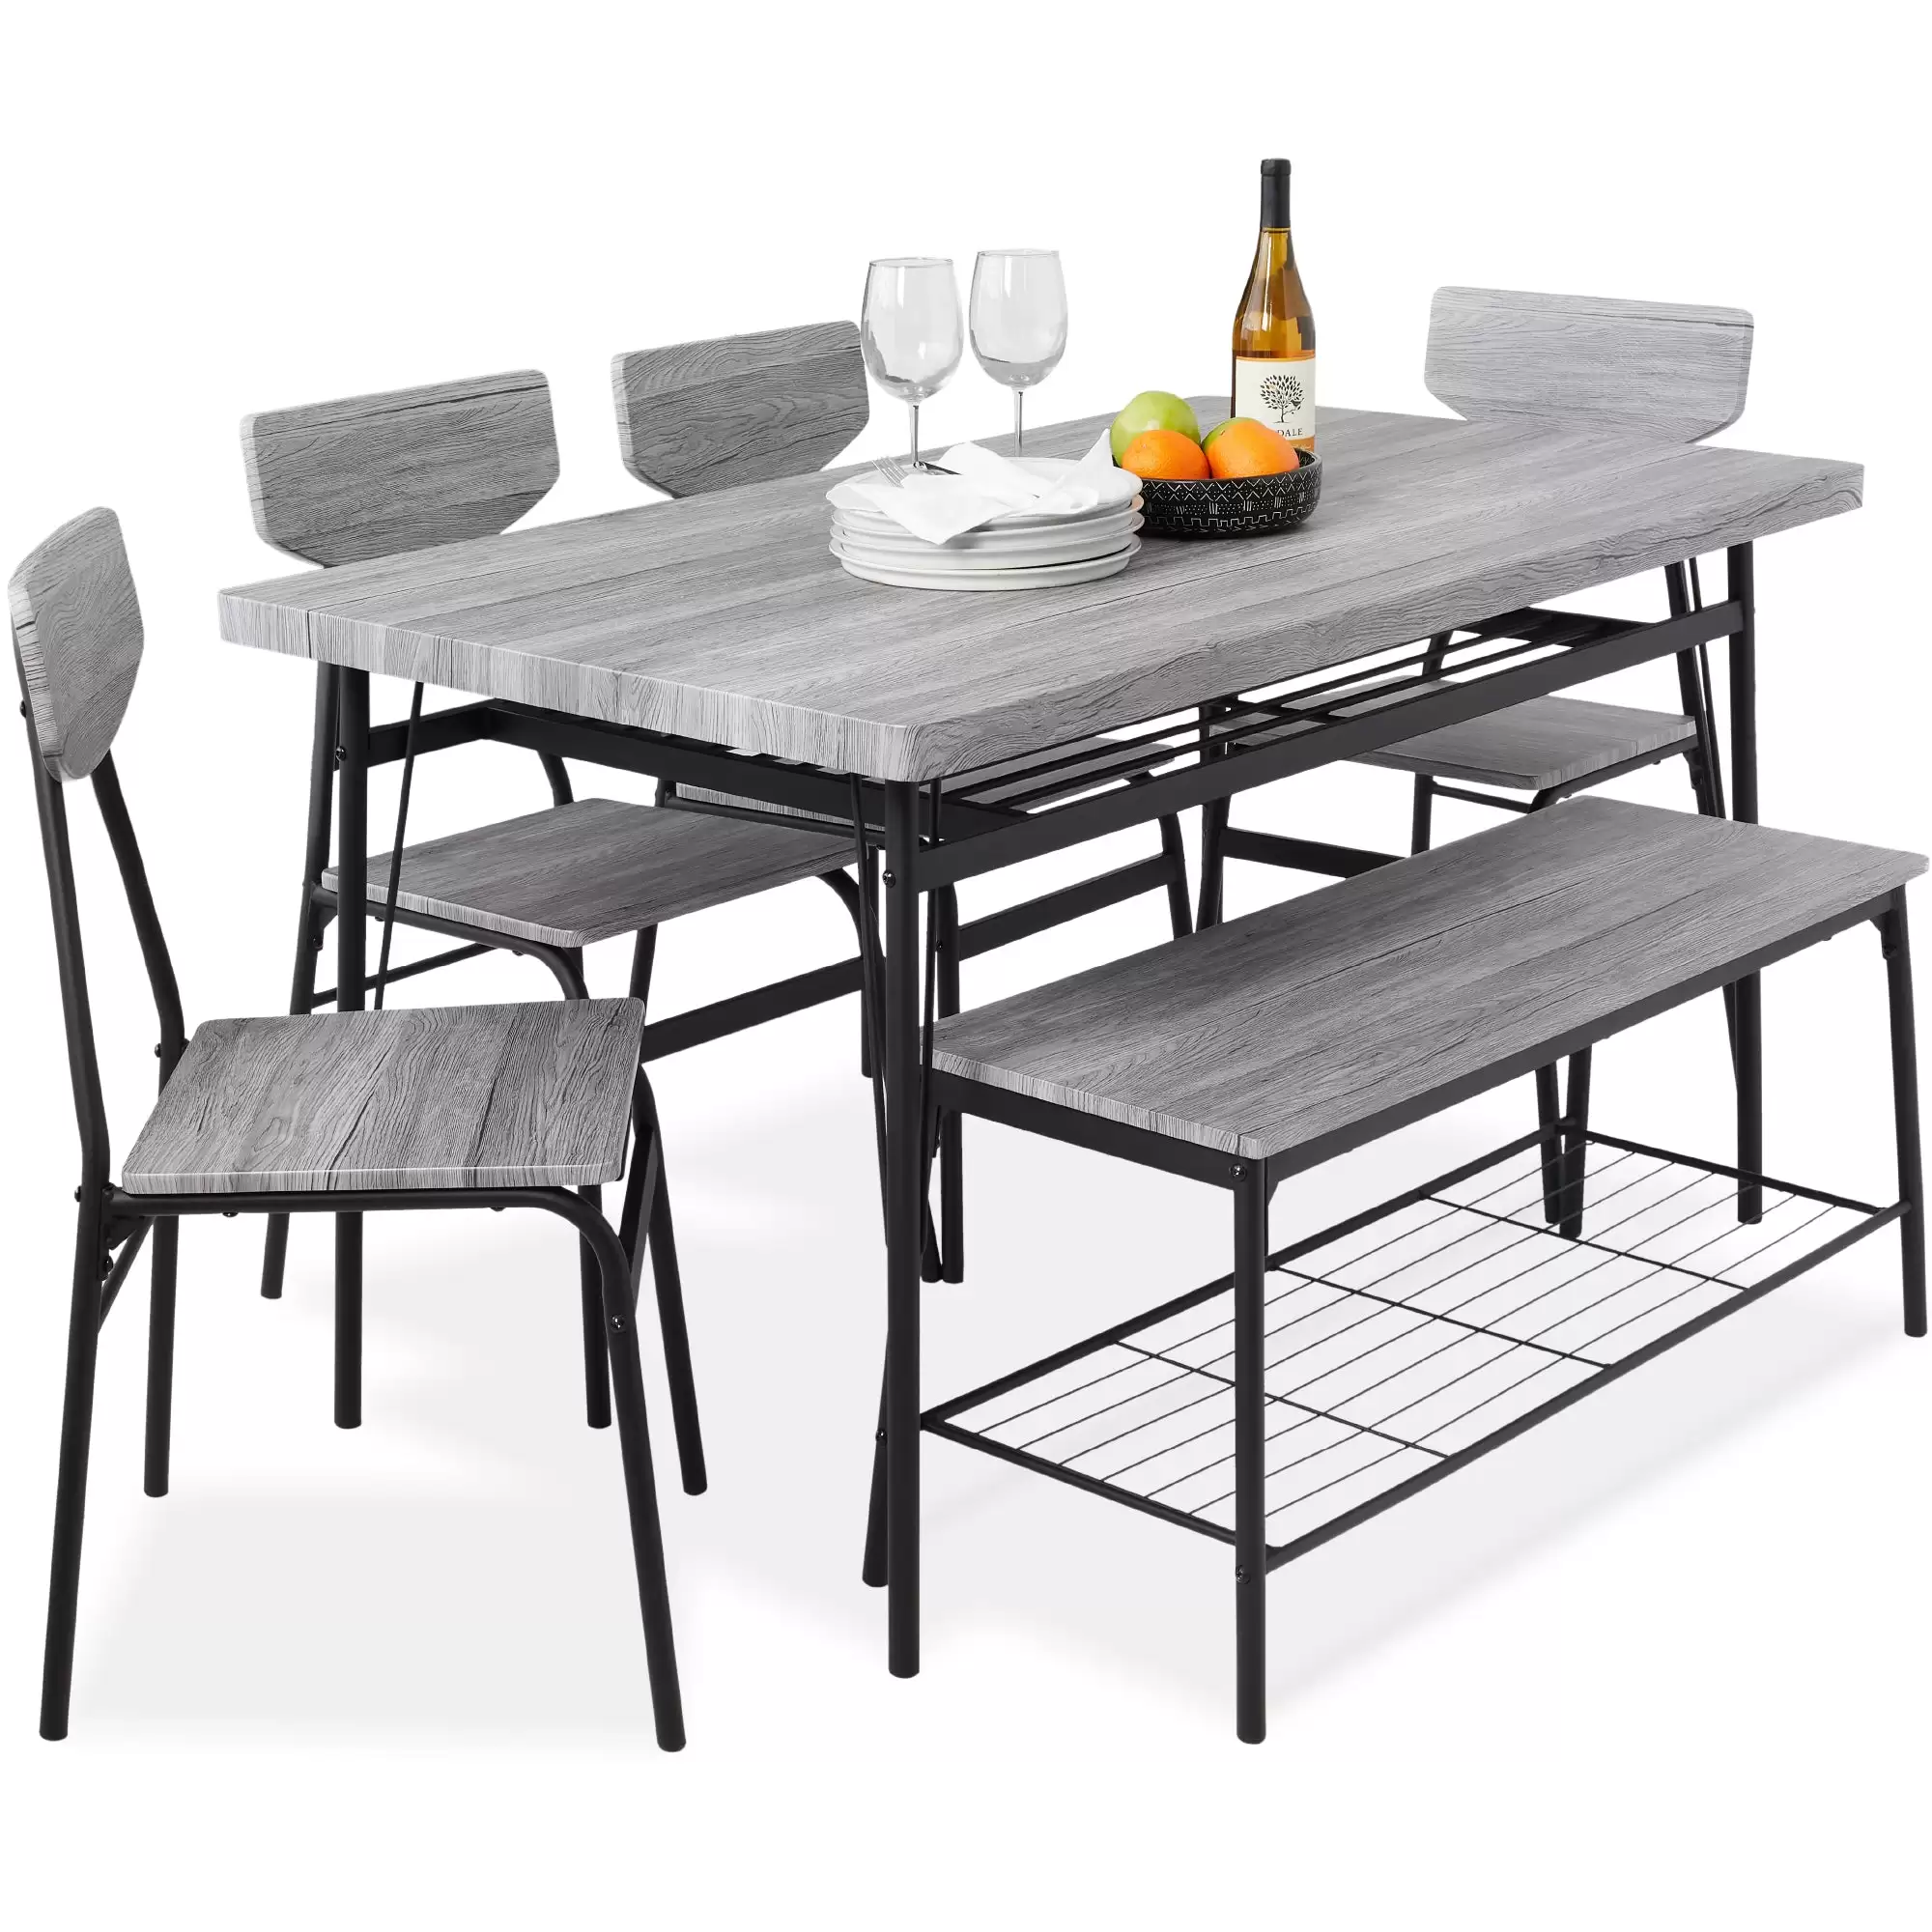 Pay $199.99 6-Piece Modern Dining Set W/ Storage Racks, Table, Bench, 4 Chairs At Bestchoiceproducts